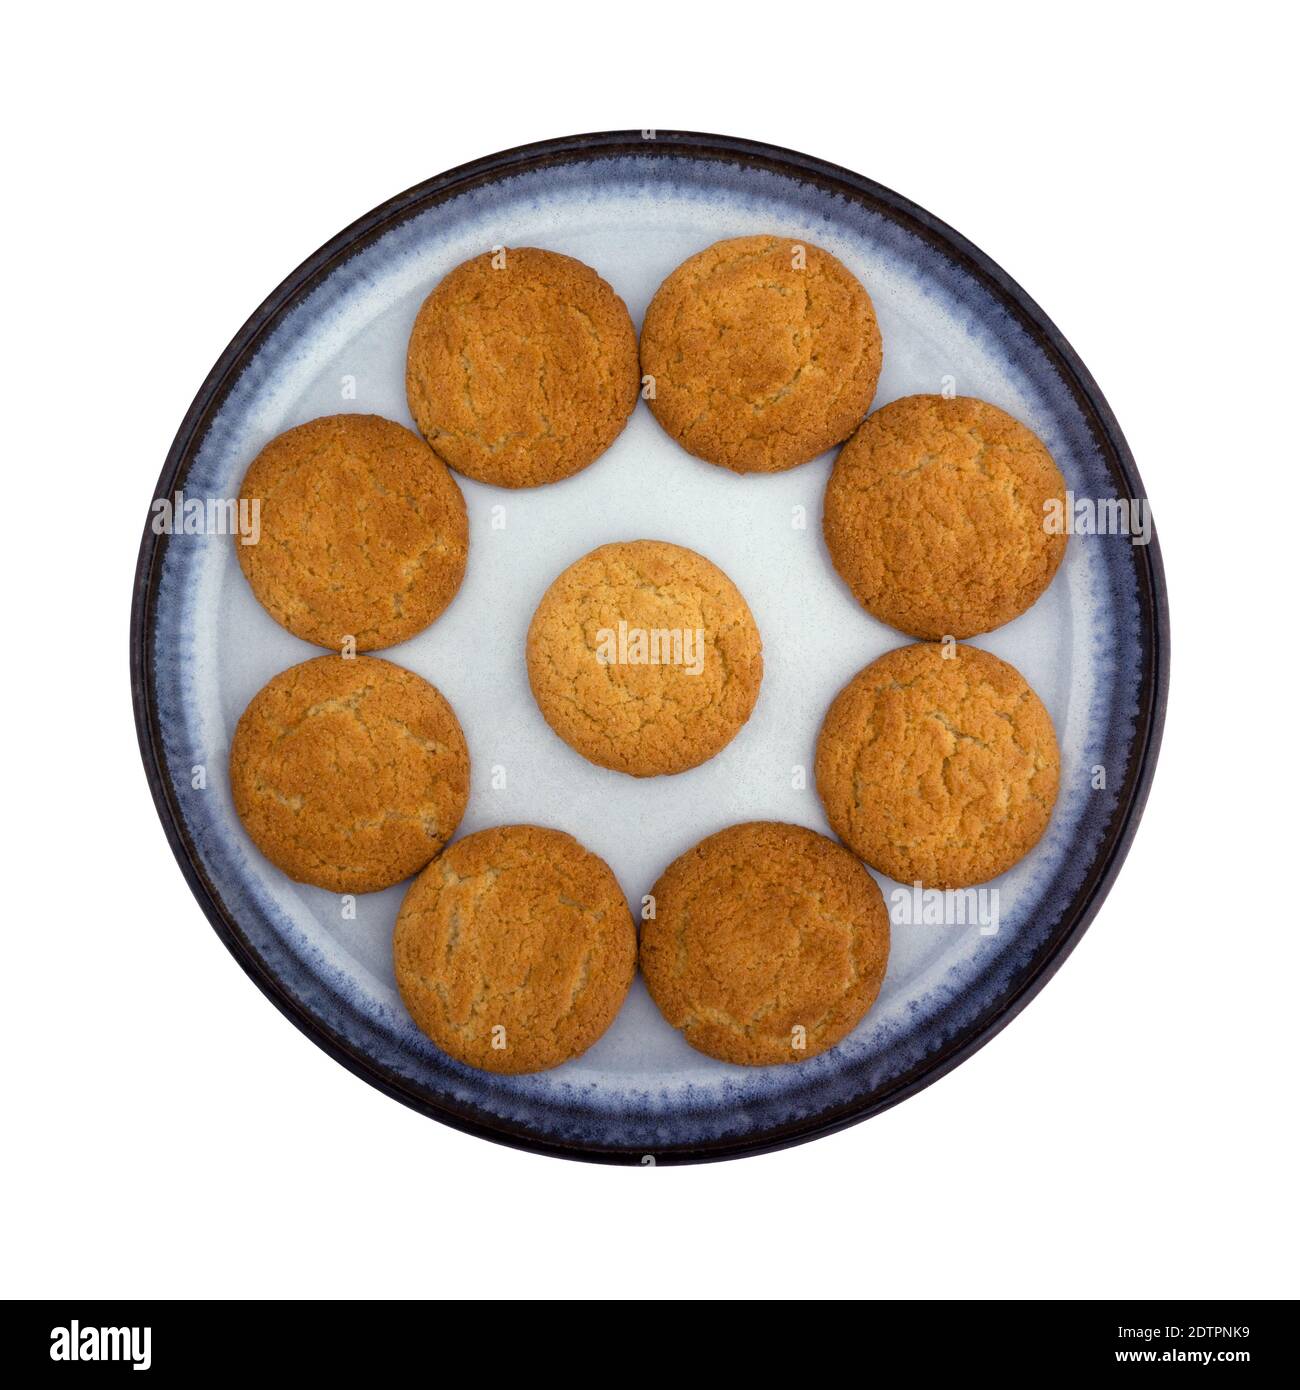 Top view of a group of coconut flavor cookies arranged on a blue stoneware plate isolated on a white background. Stock Photo